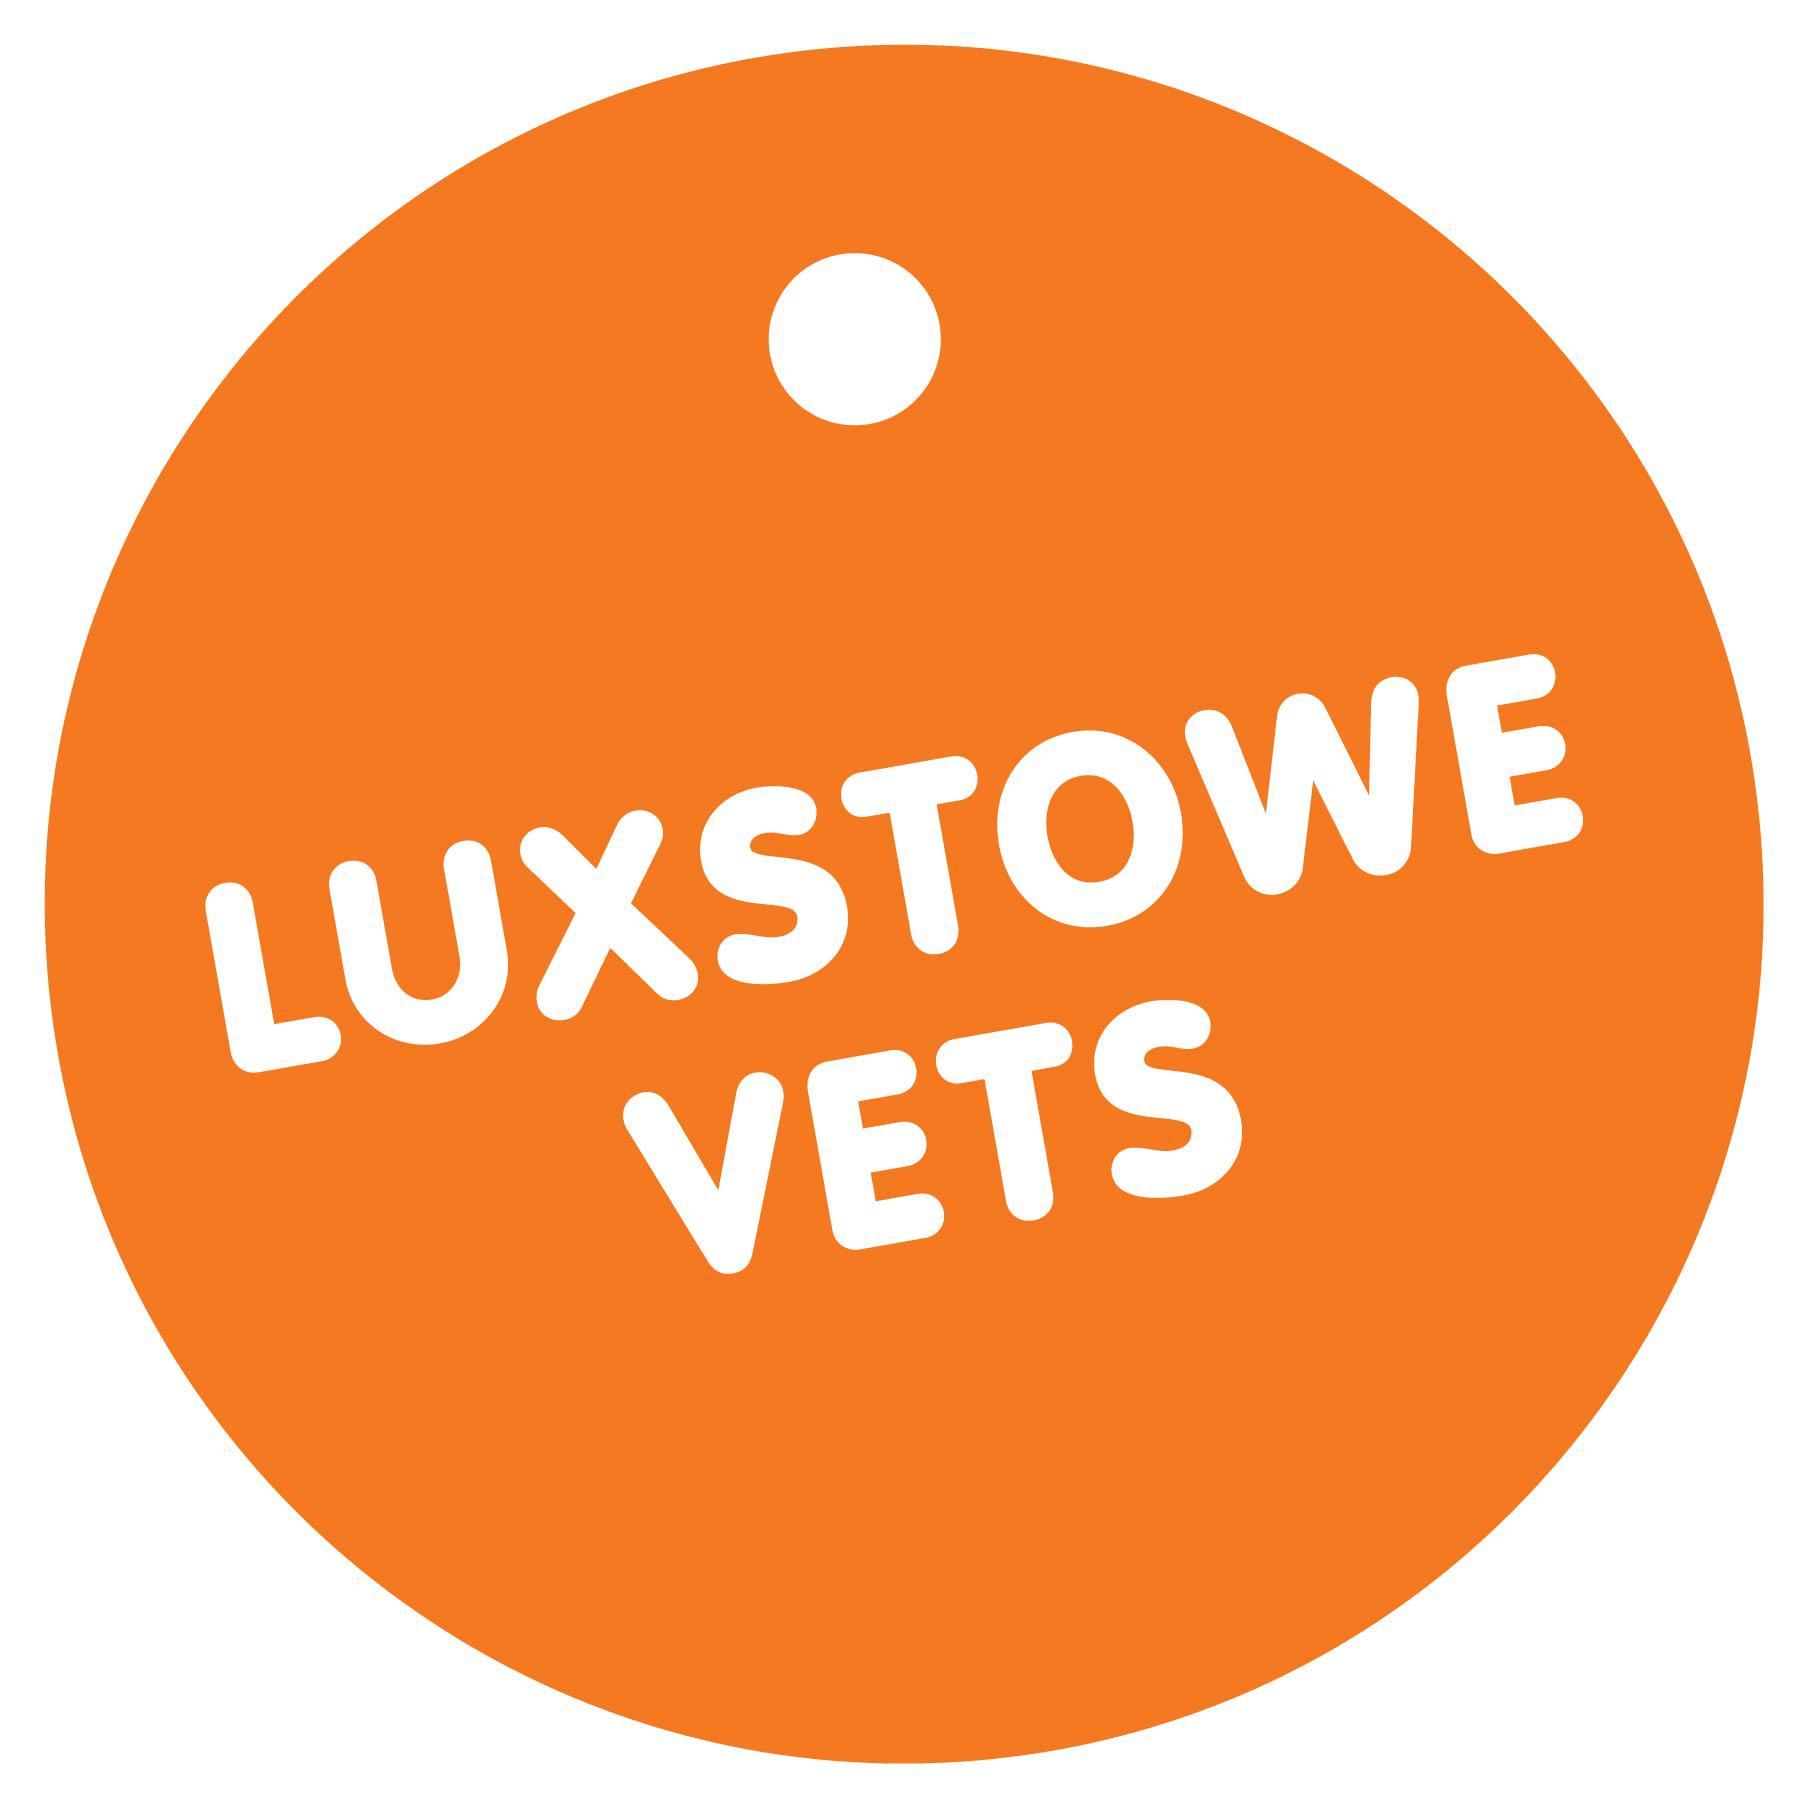 Luxstowe Vets, Torpoint - Torpoint, Cornwall PL11 2BS - 01579 342120 | ShowMeLocal.com